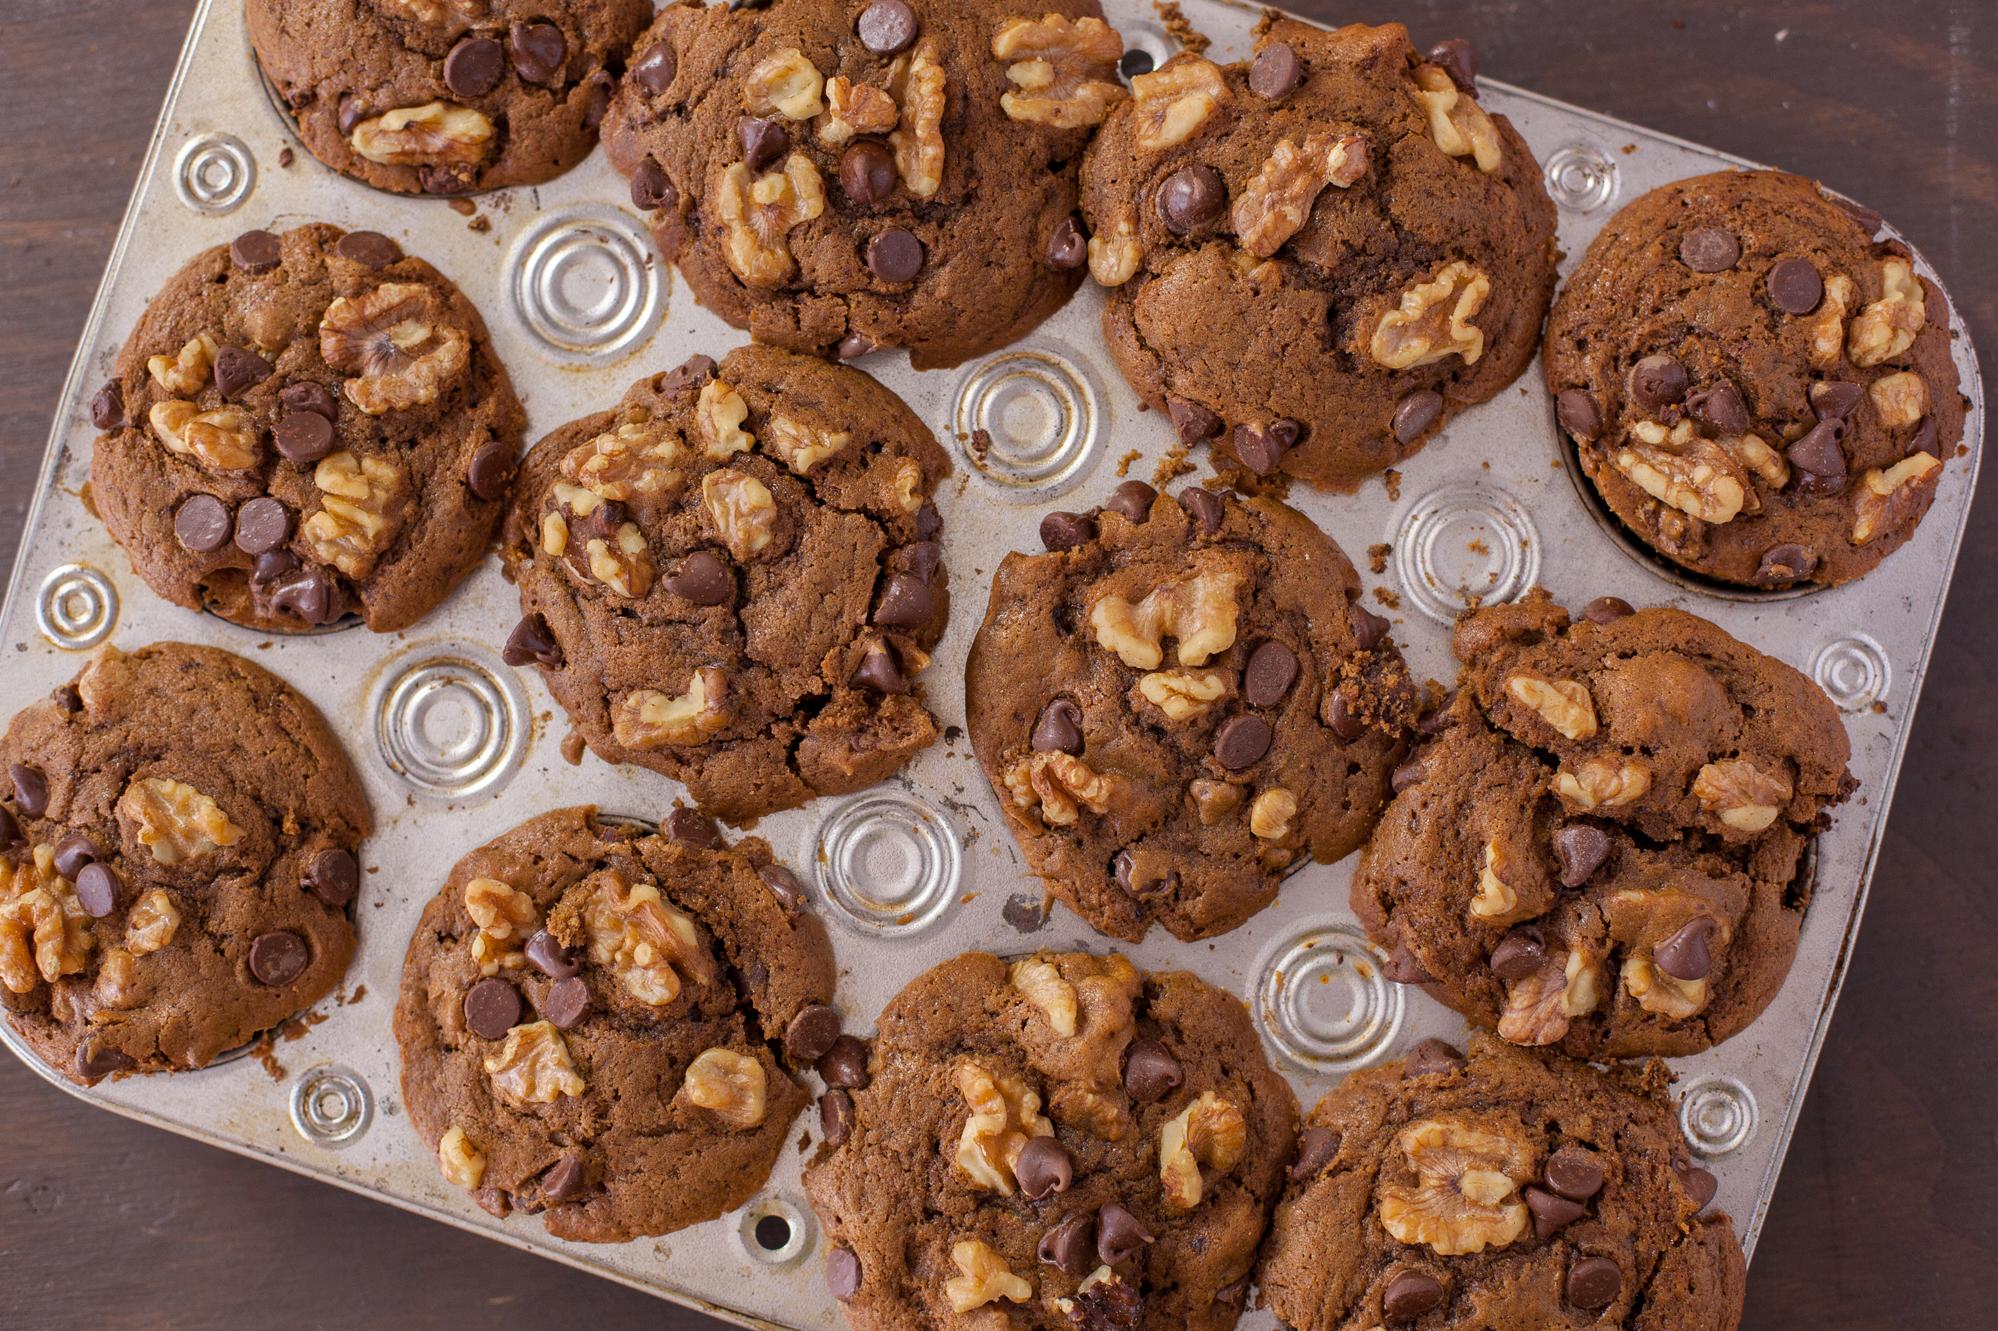  Wake up and smell the coffee...walnut breakfast muffins!